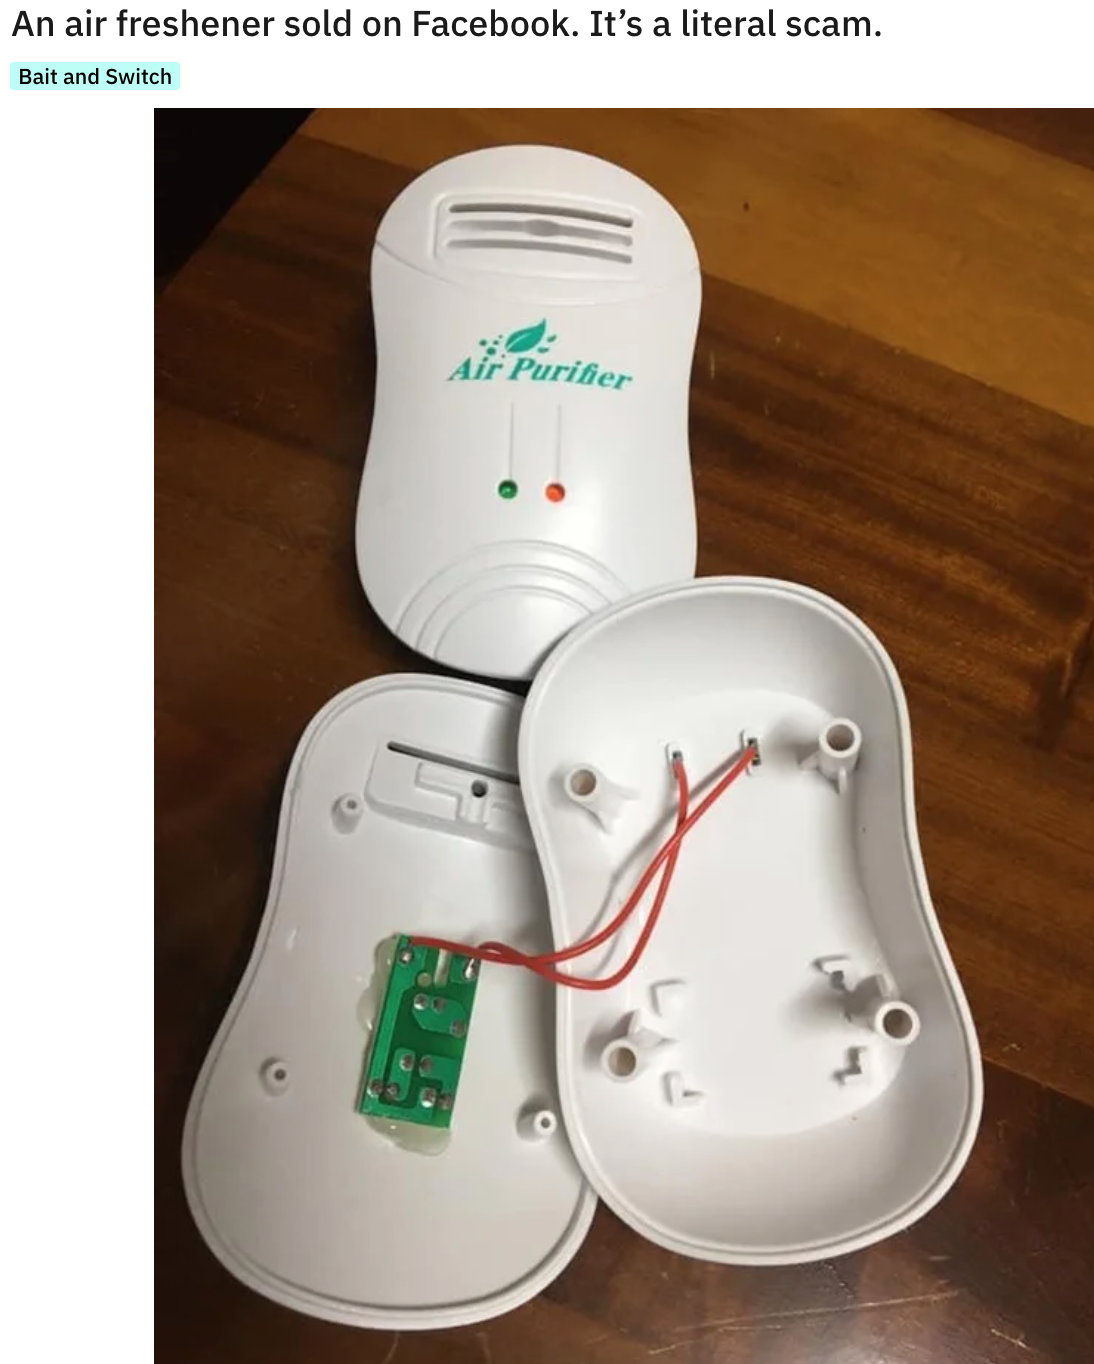 funny design fails - shoe - An air freshener sold on Facebook. It's a literal scam. Bait and Switch Air Purifier